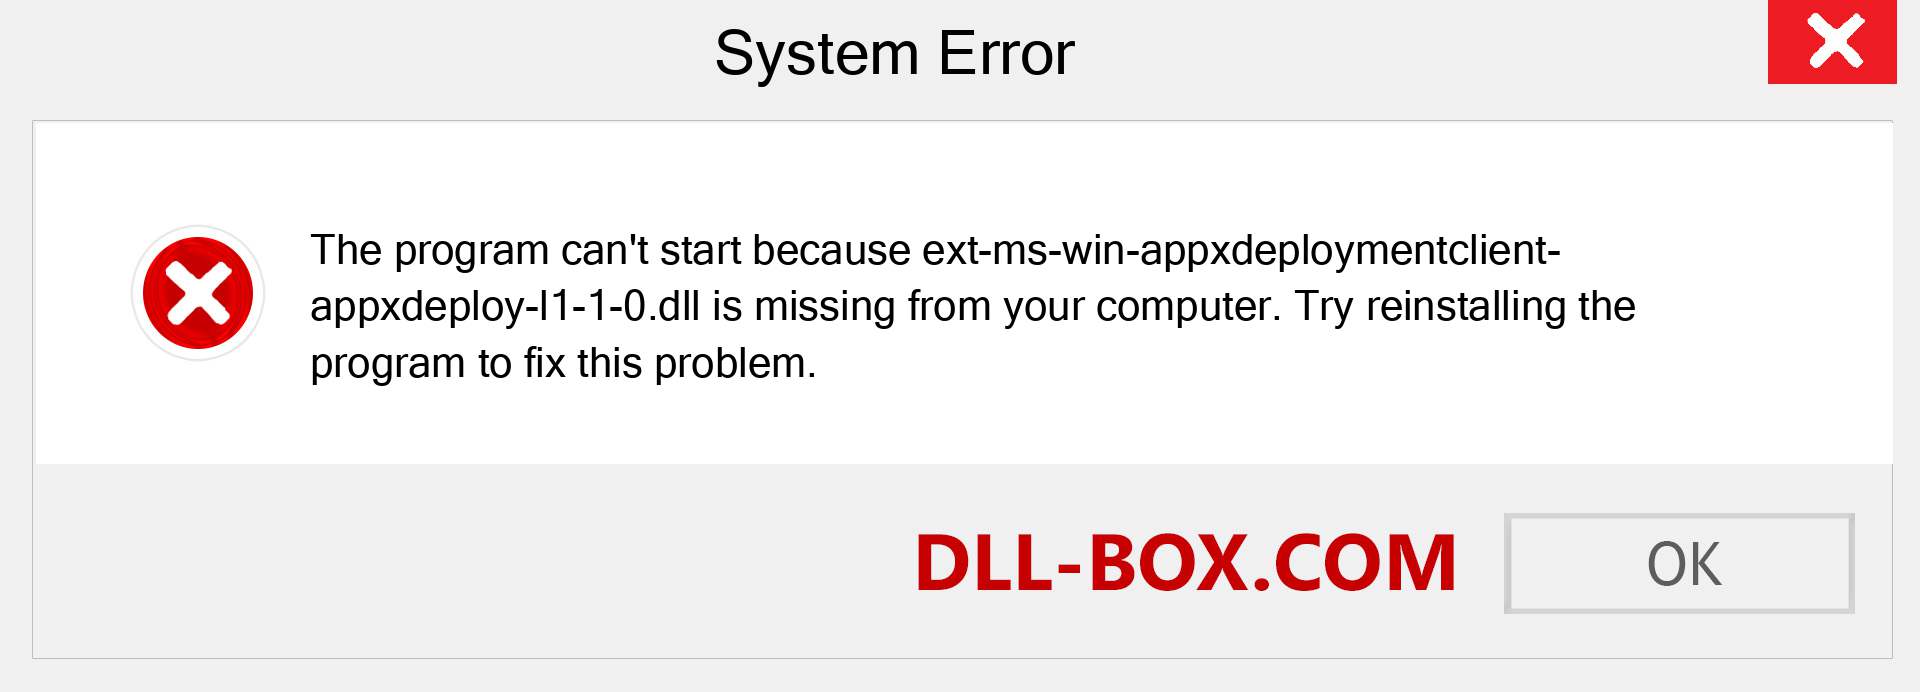  ext-ms-win-appxdeploymentclient-appxdeploy-l1-1-0.dll file is missing?. Download for Windows 7, 8, 10 - Fix  ext-ms-win-appxdeploymentclient-appxdeploy-l1-1-0 dll Missing Error on Windows, photos, images